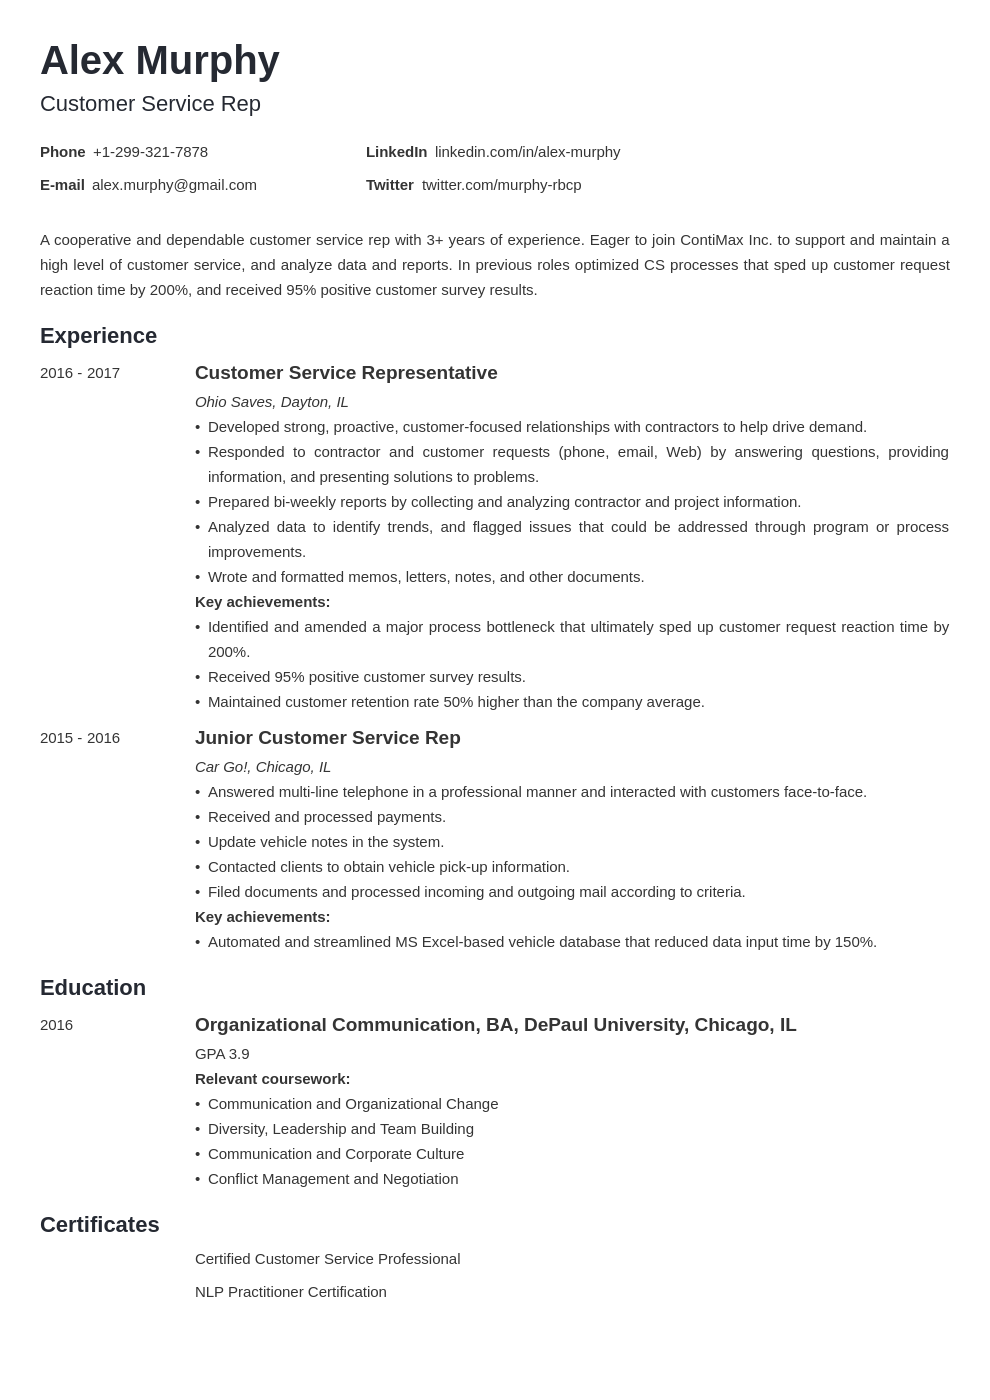 relevant coursework accounting resume